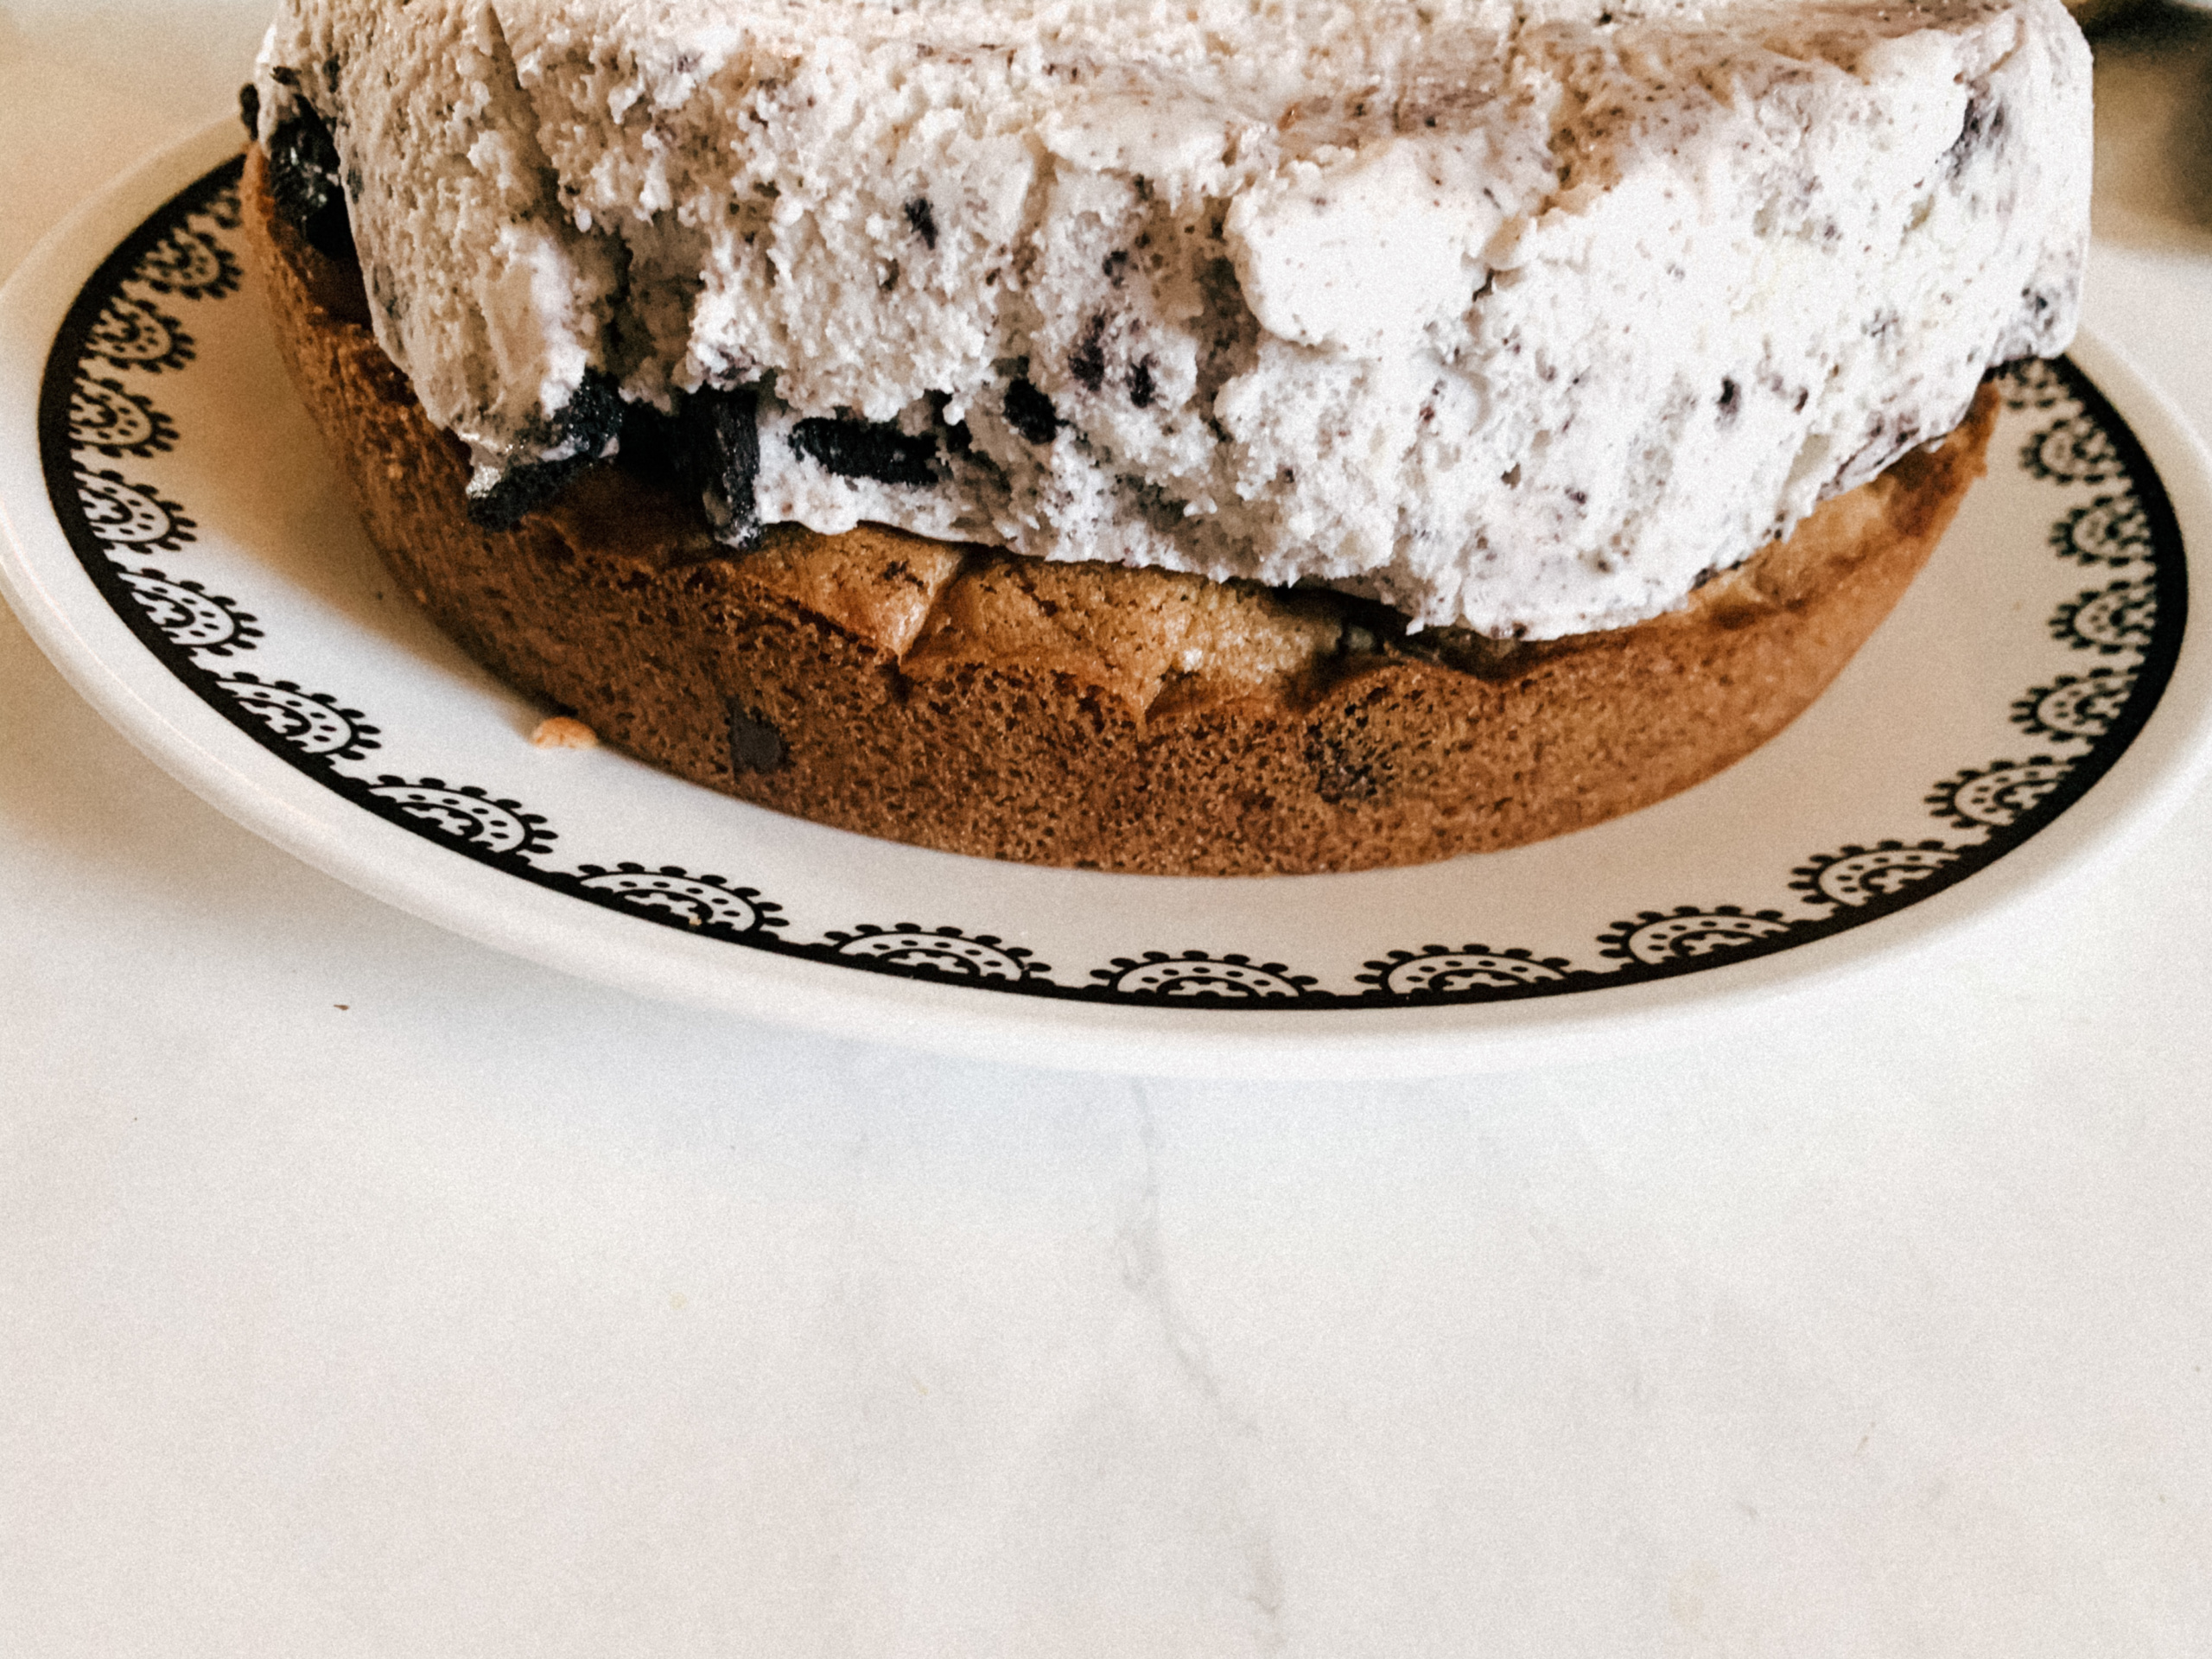 Assembled Cake Easy and Delicious Cookie Ice Cream Cake Recipe #recipe #food #foodie #dessert #birthdaycake #icecreamcake #cookiecake #cookieicecreamcake #cake #pie #cookiecakerecipe #simplybysimone Simone Piliero